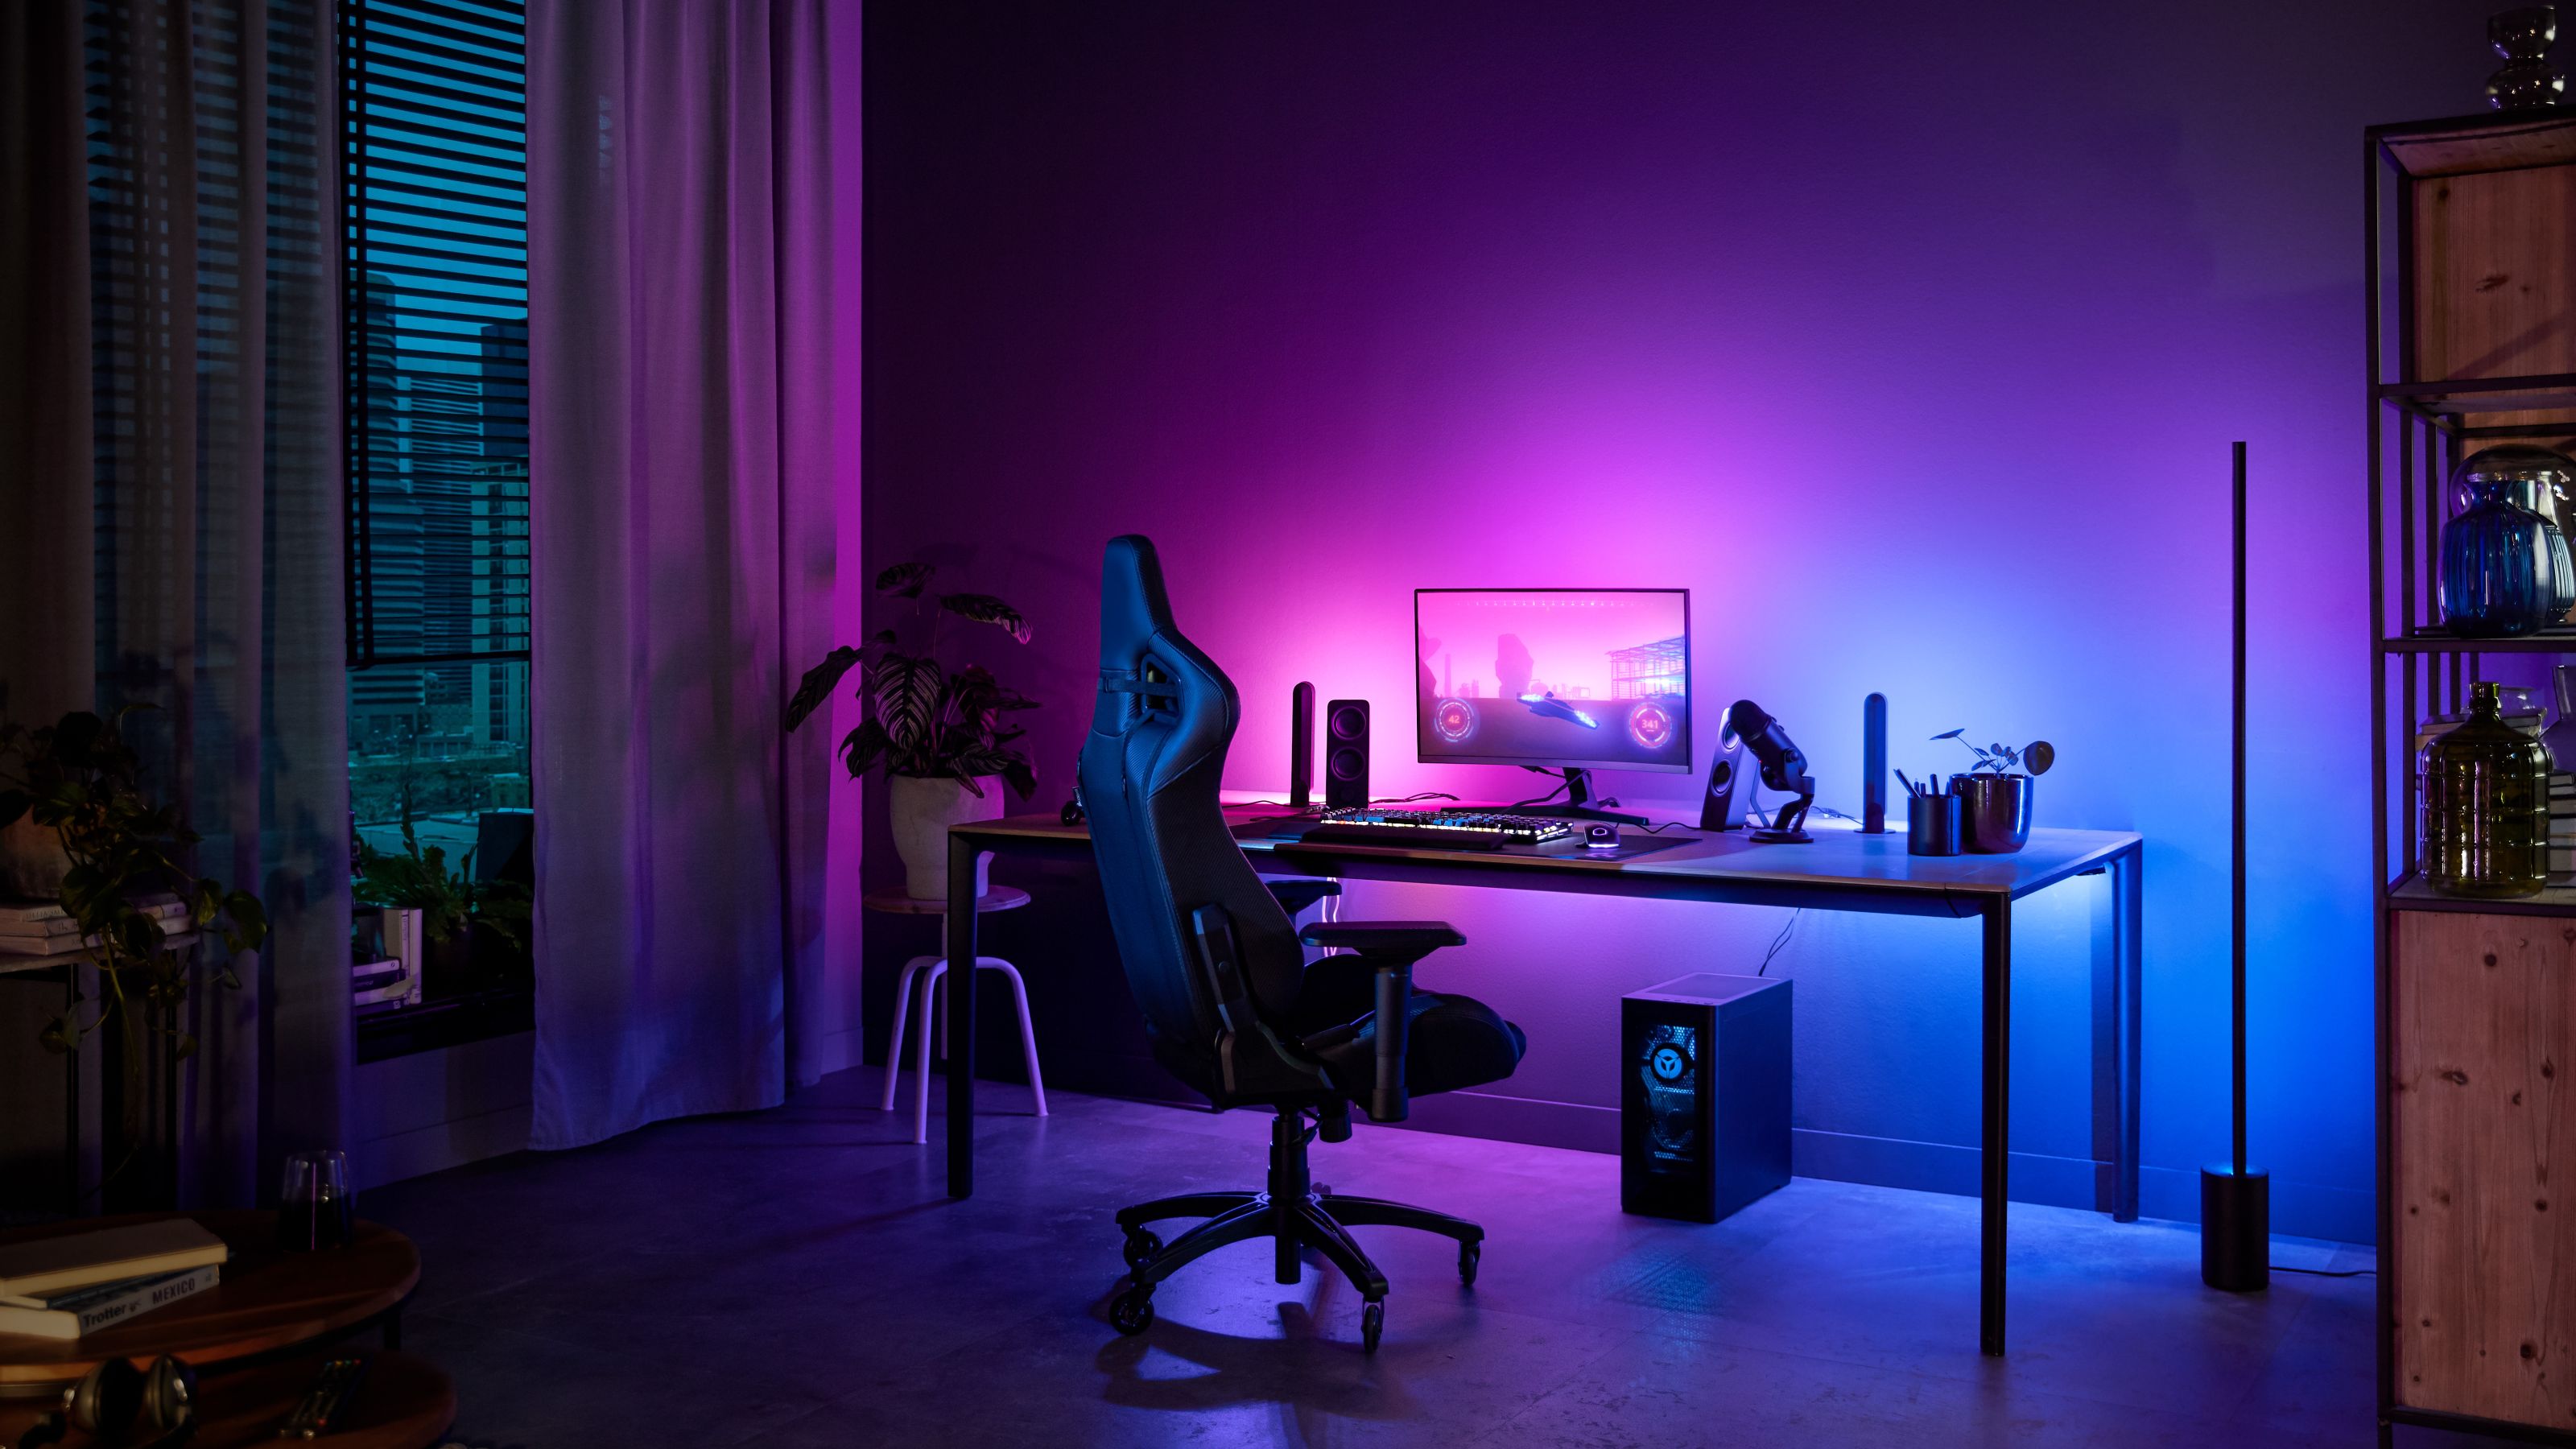 First impression: The new Philips Hue Lightguide series 